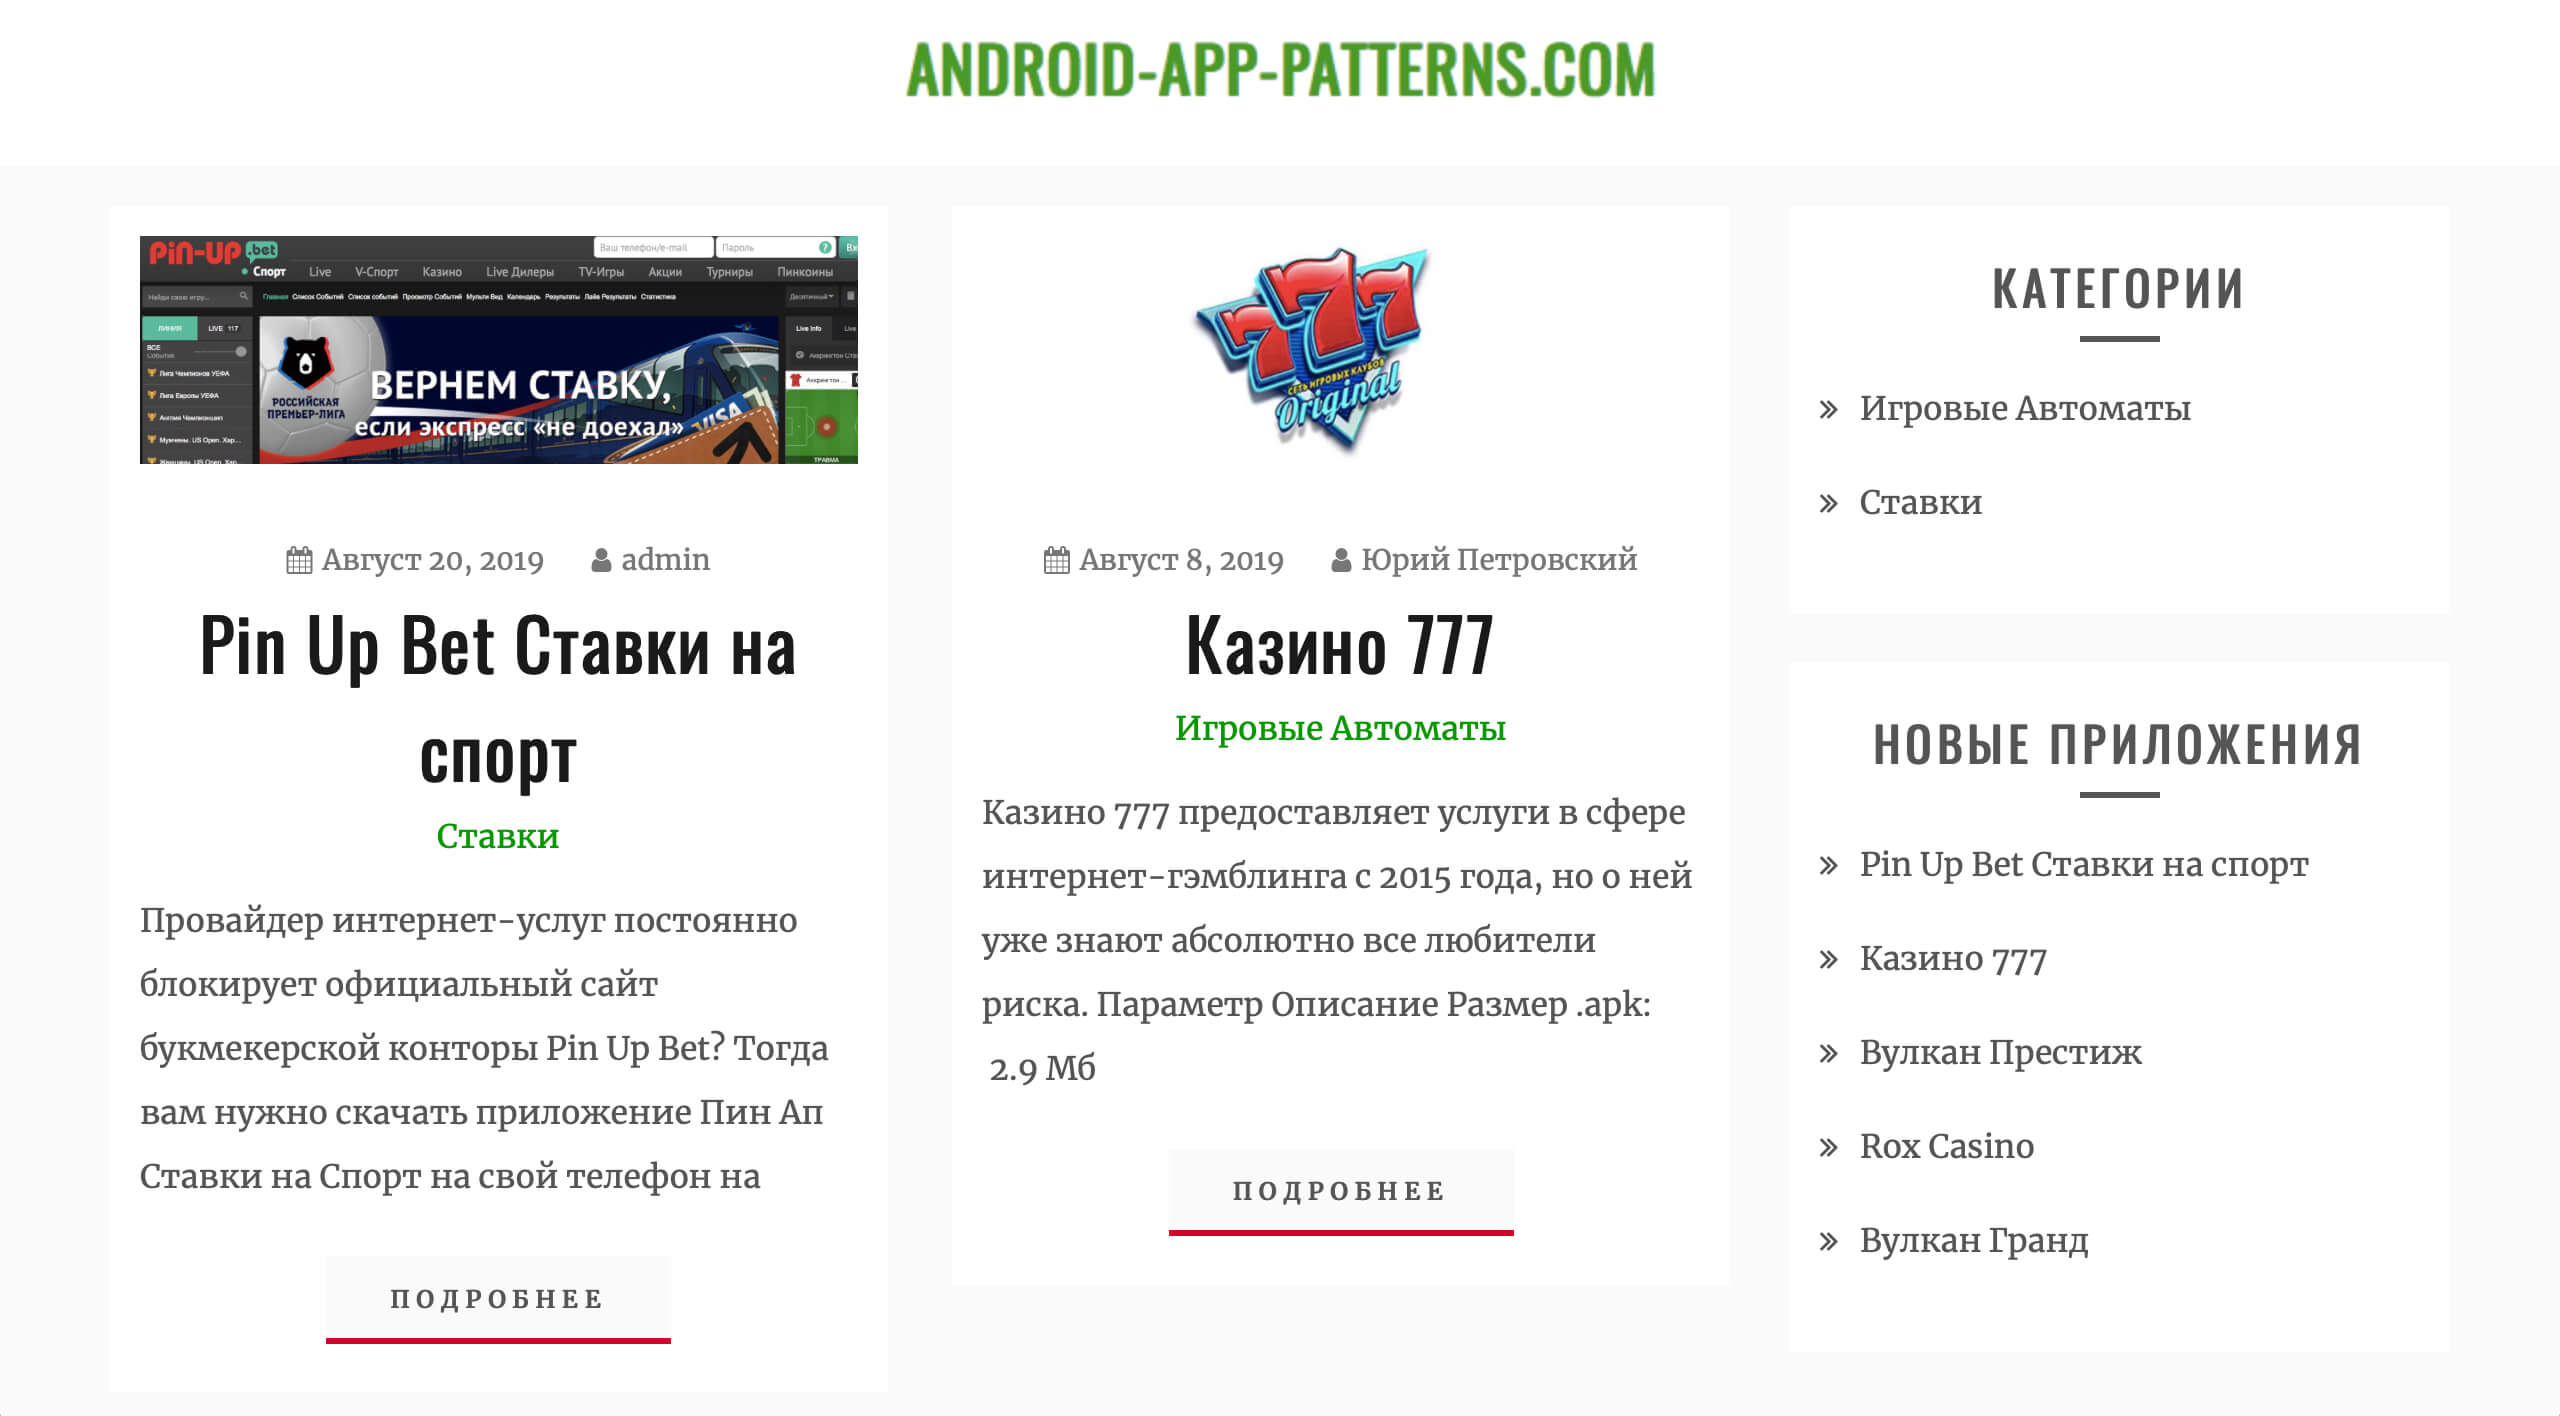 Android-App-Patterns.com